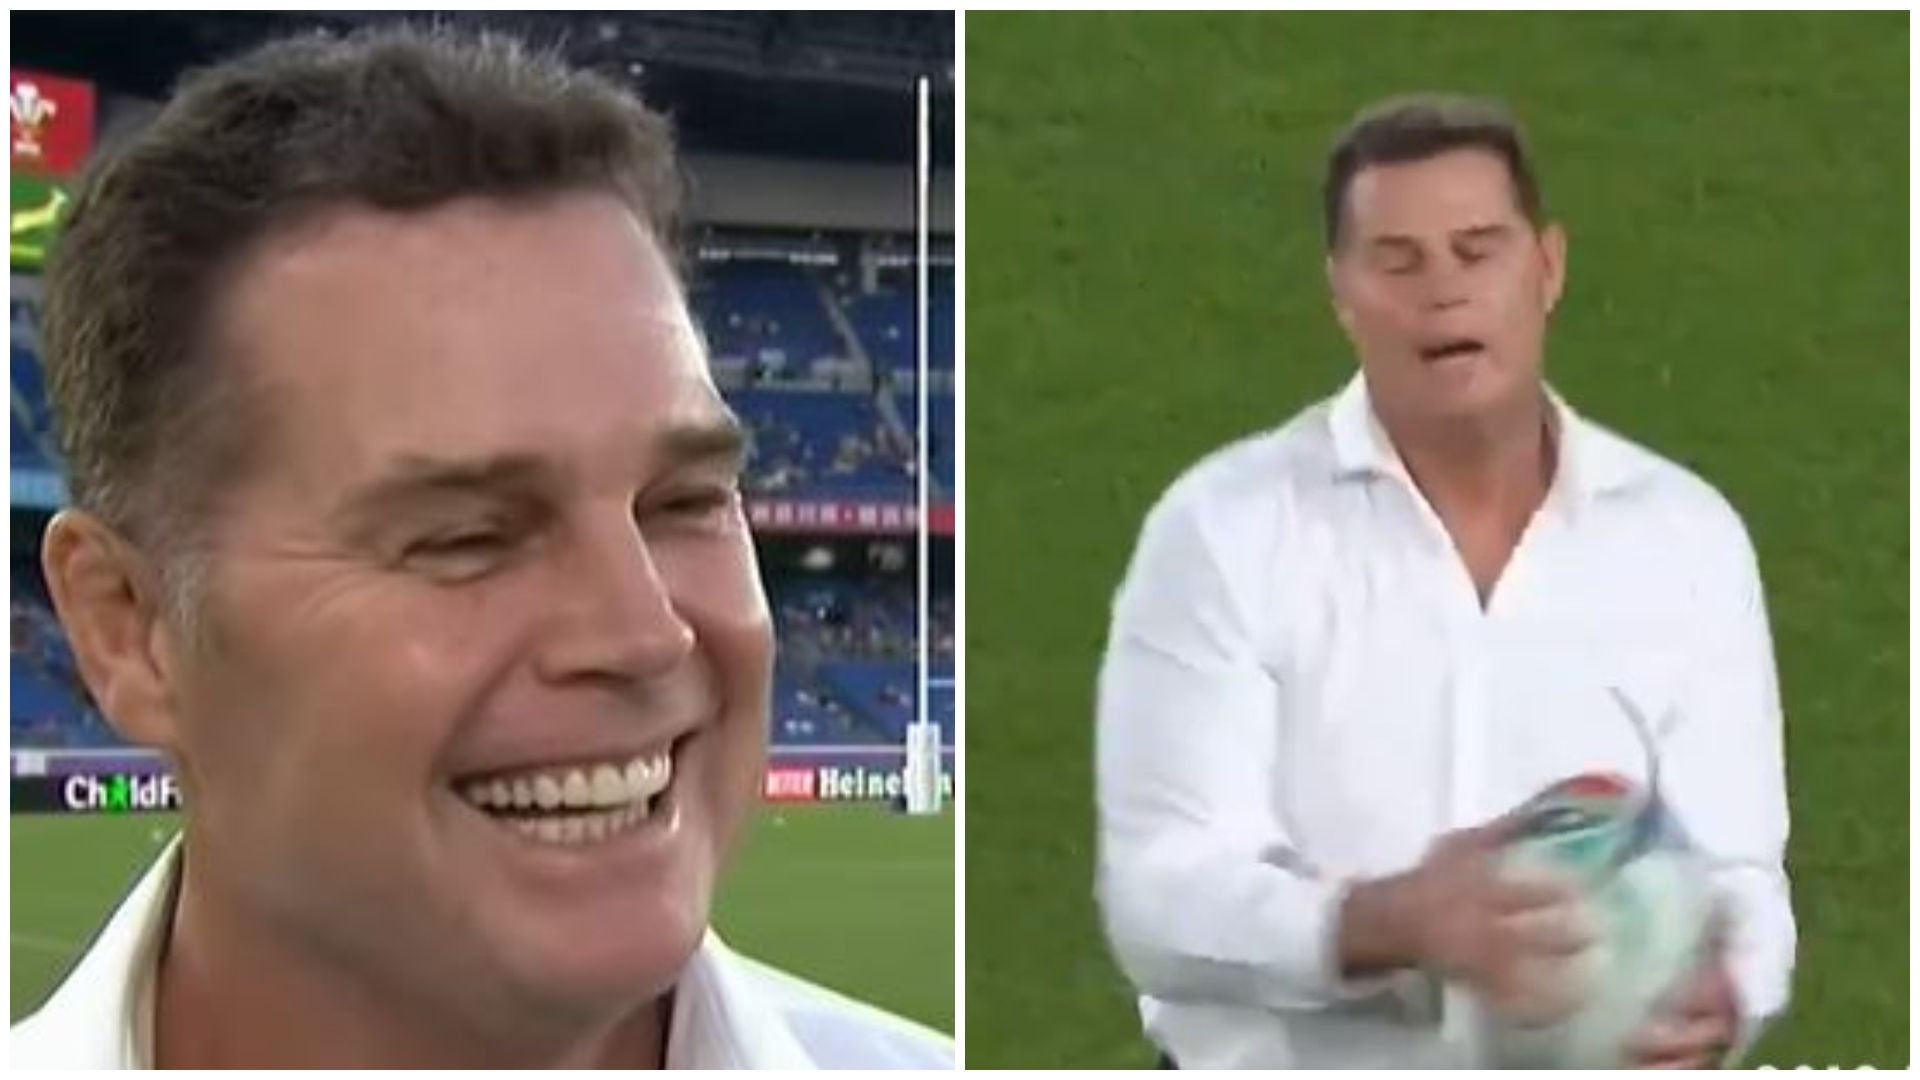 Rassie Erasmus has the last laugh by living his best life in his latest post